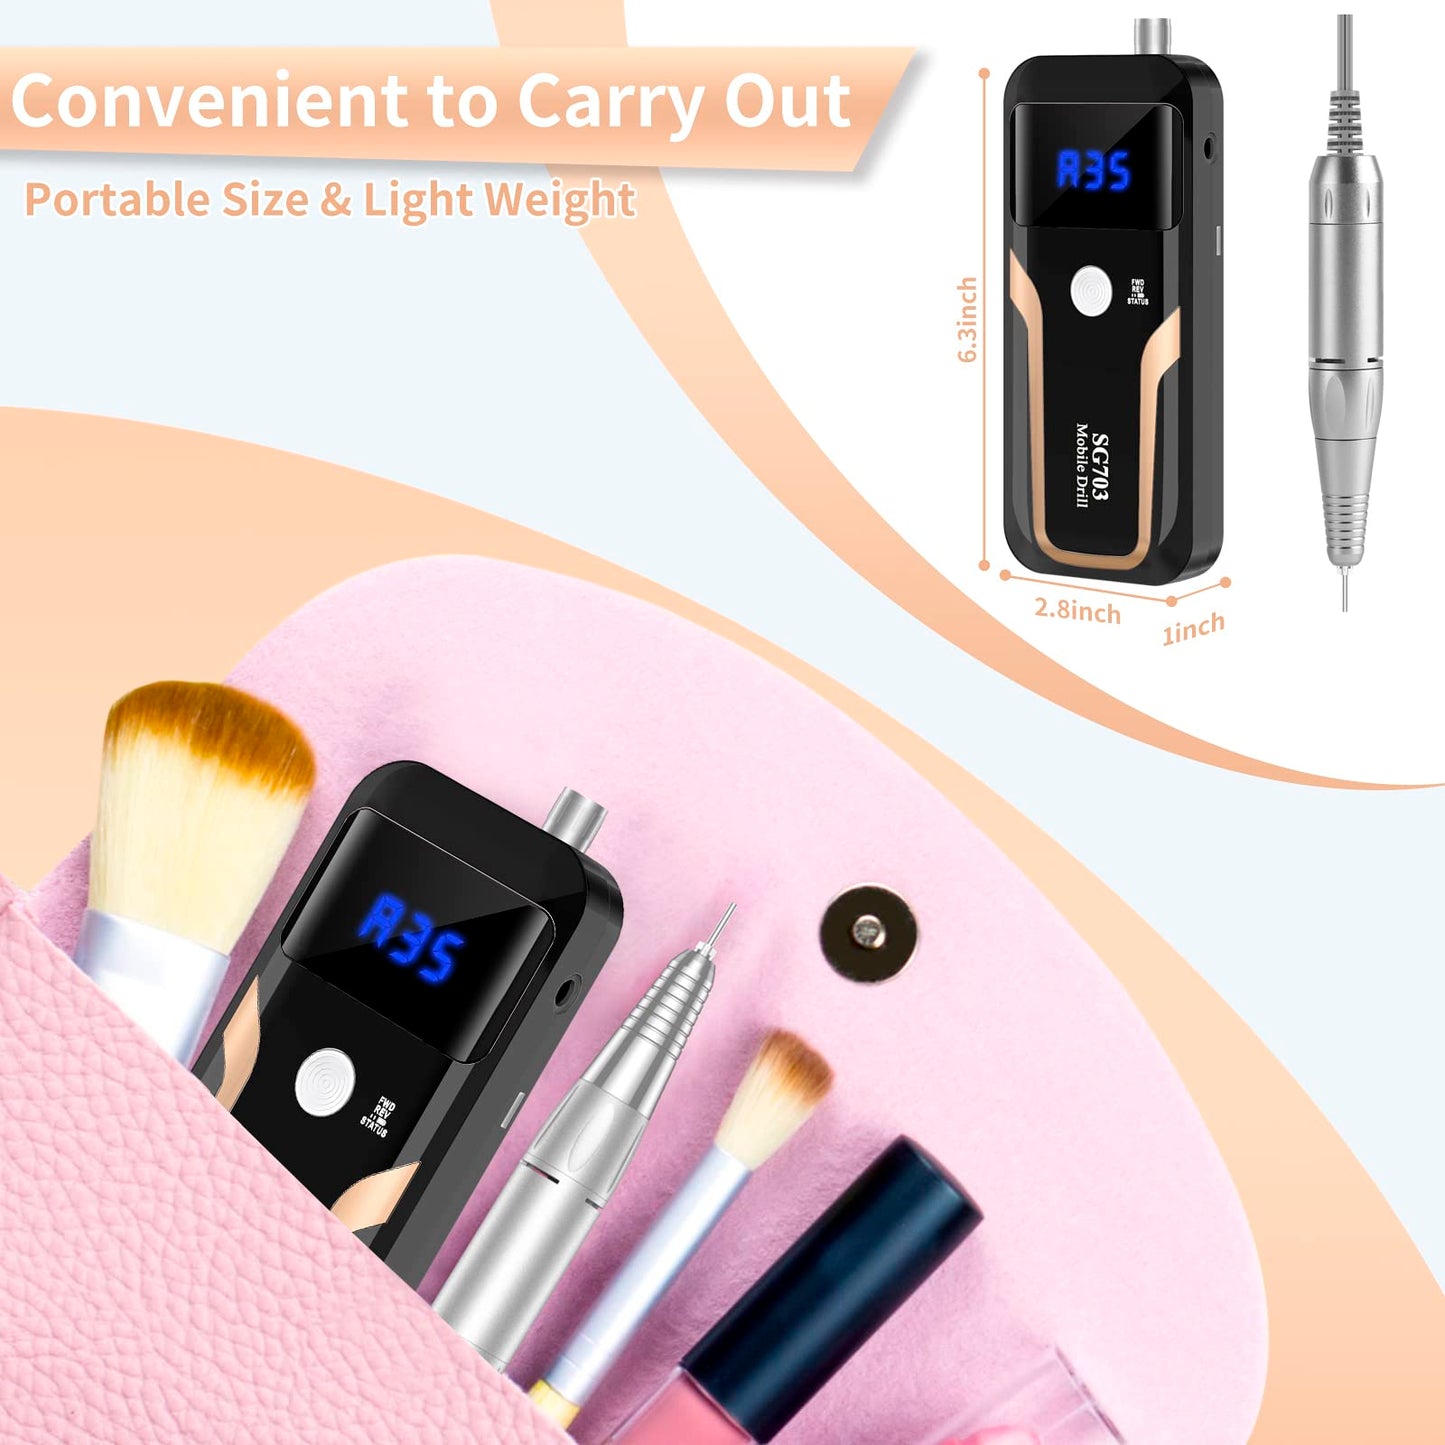 Portable Nail Drill Professional 35000 RPM, Rechargeable Electric Nail File Machine E File for Acrylic Nails Gel Polishing Removing, Cordless Efile with Bits Kit for Manicure Salon Home, Pink